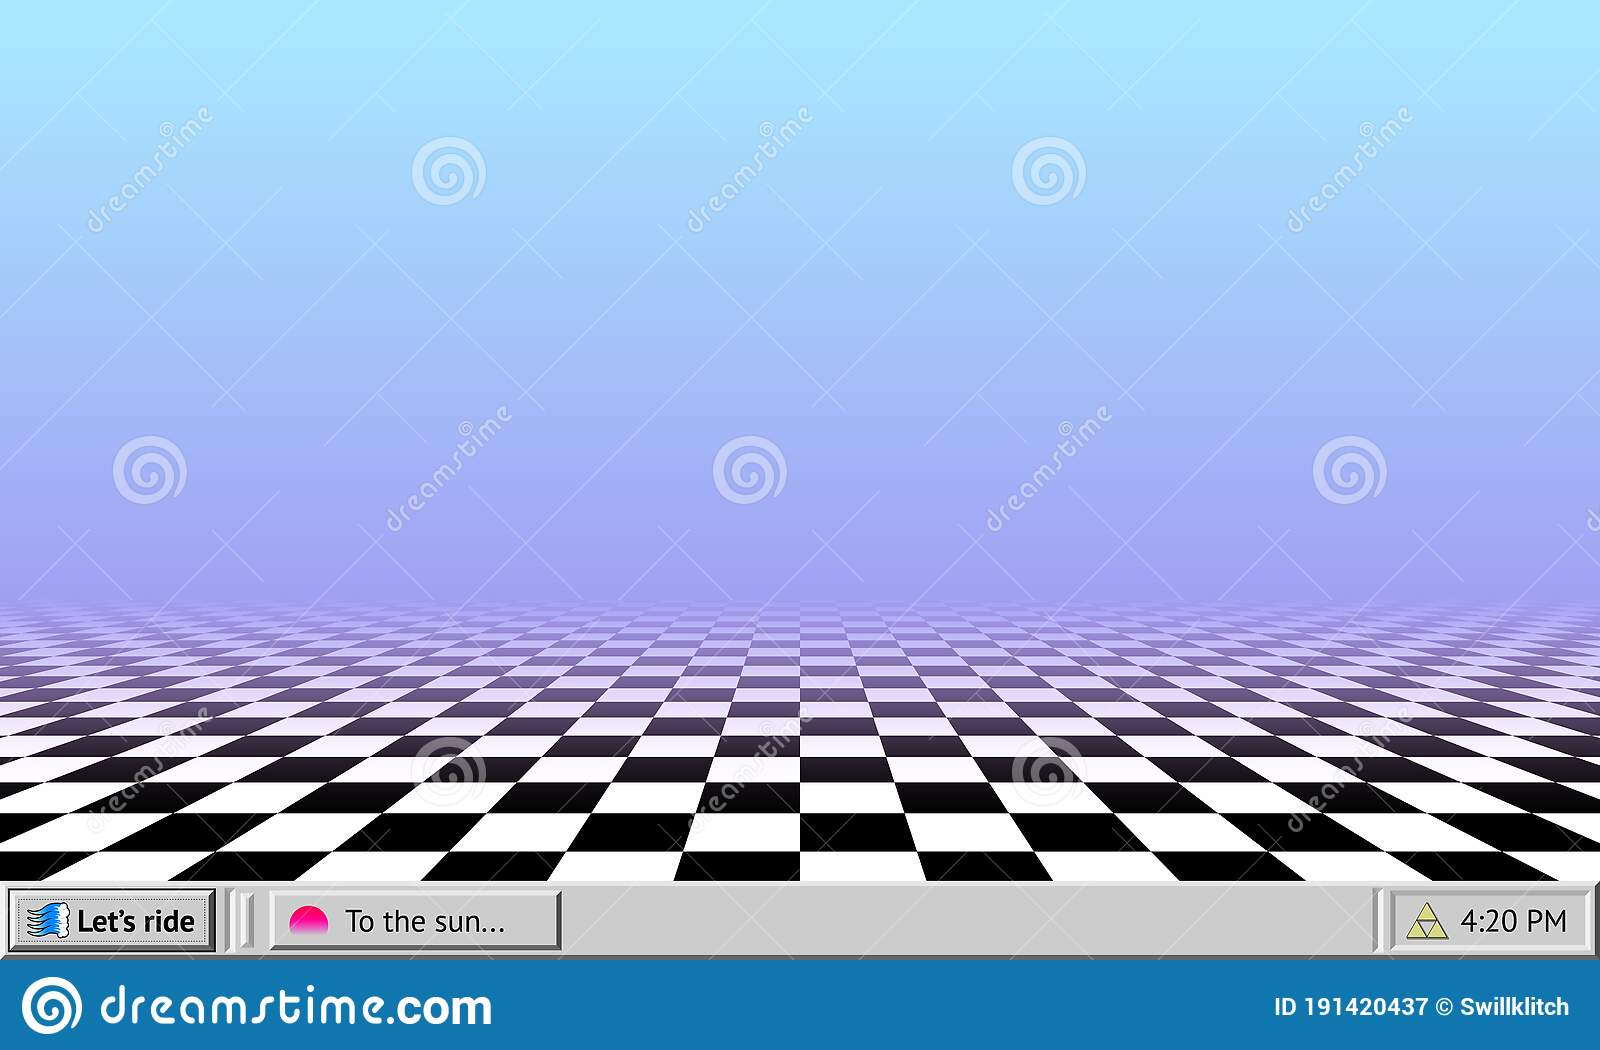 Vaporwave abstract background with retro puter interface worktable and checkered floor wallpaper stock vector